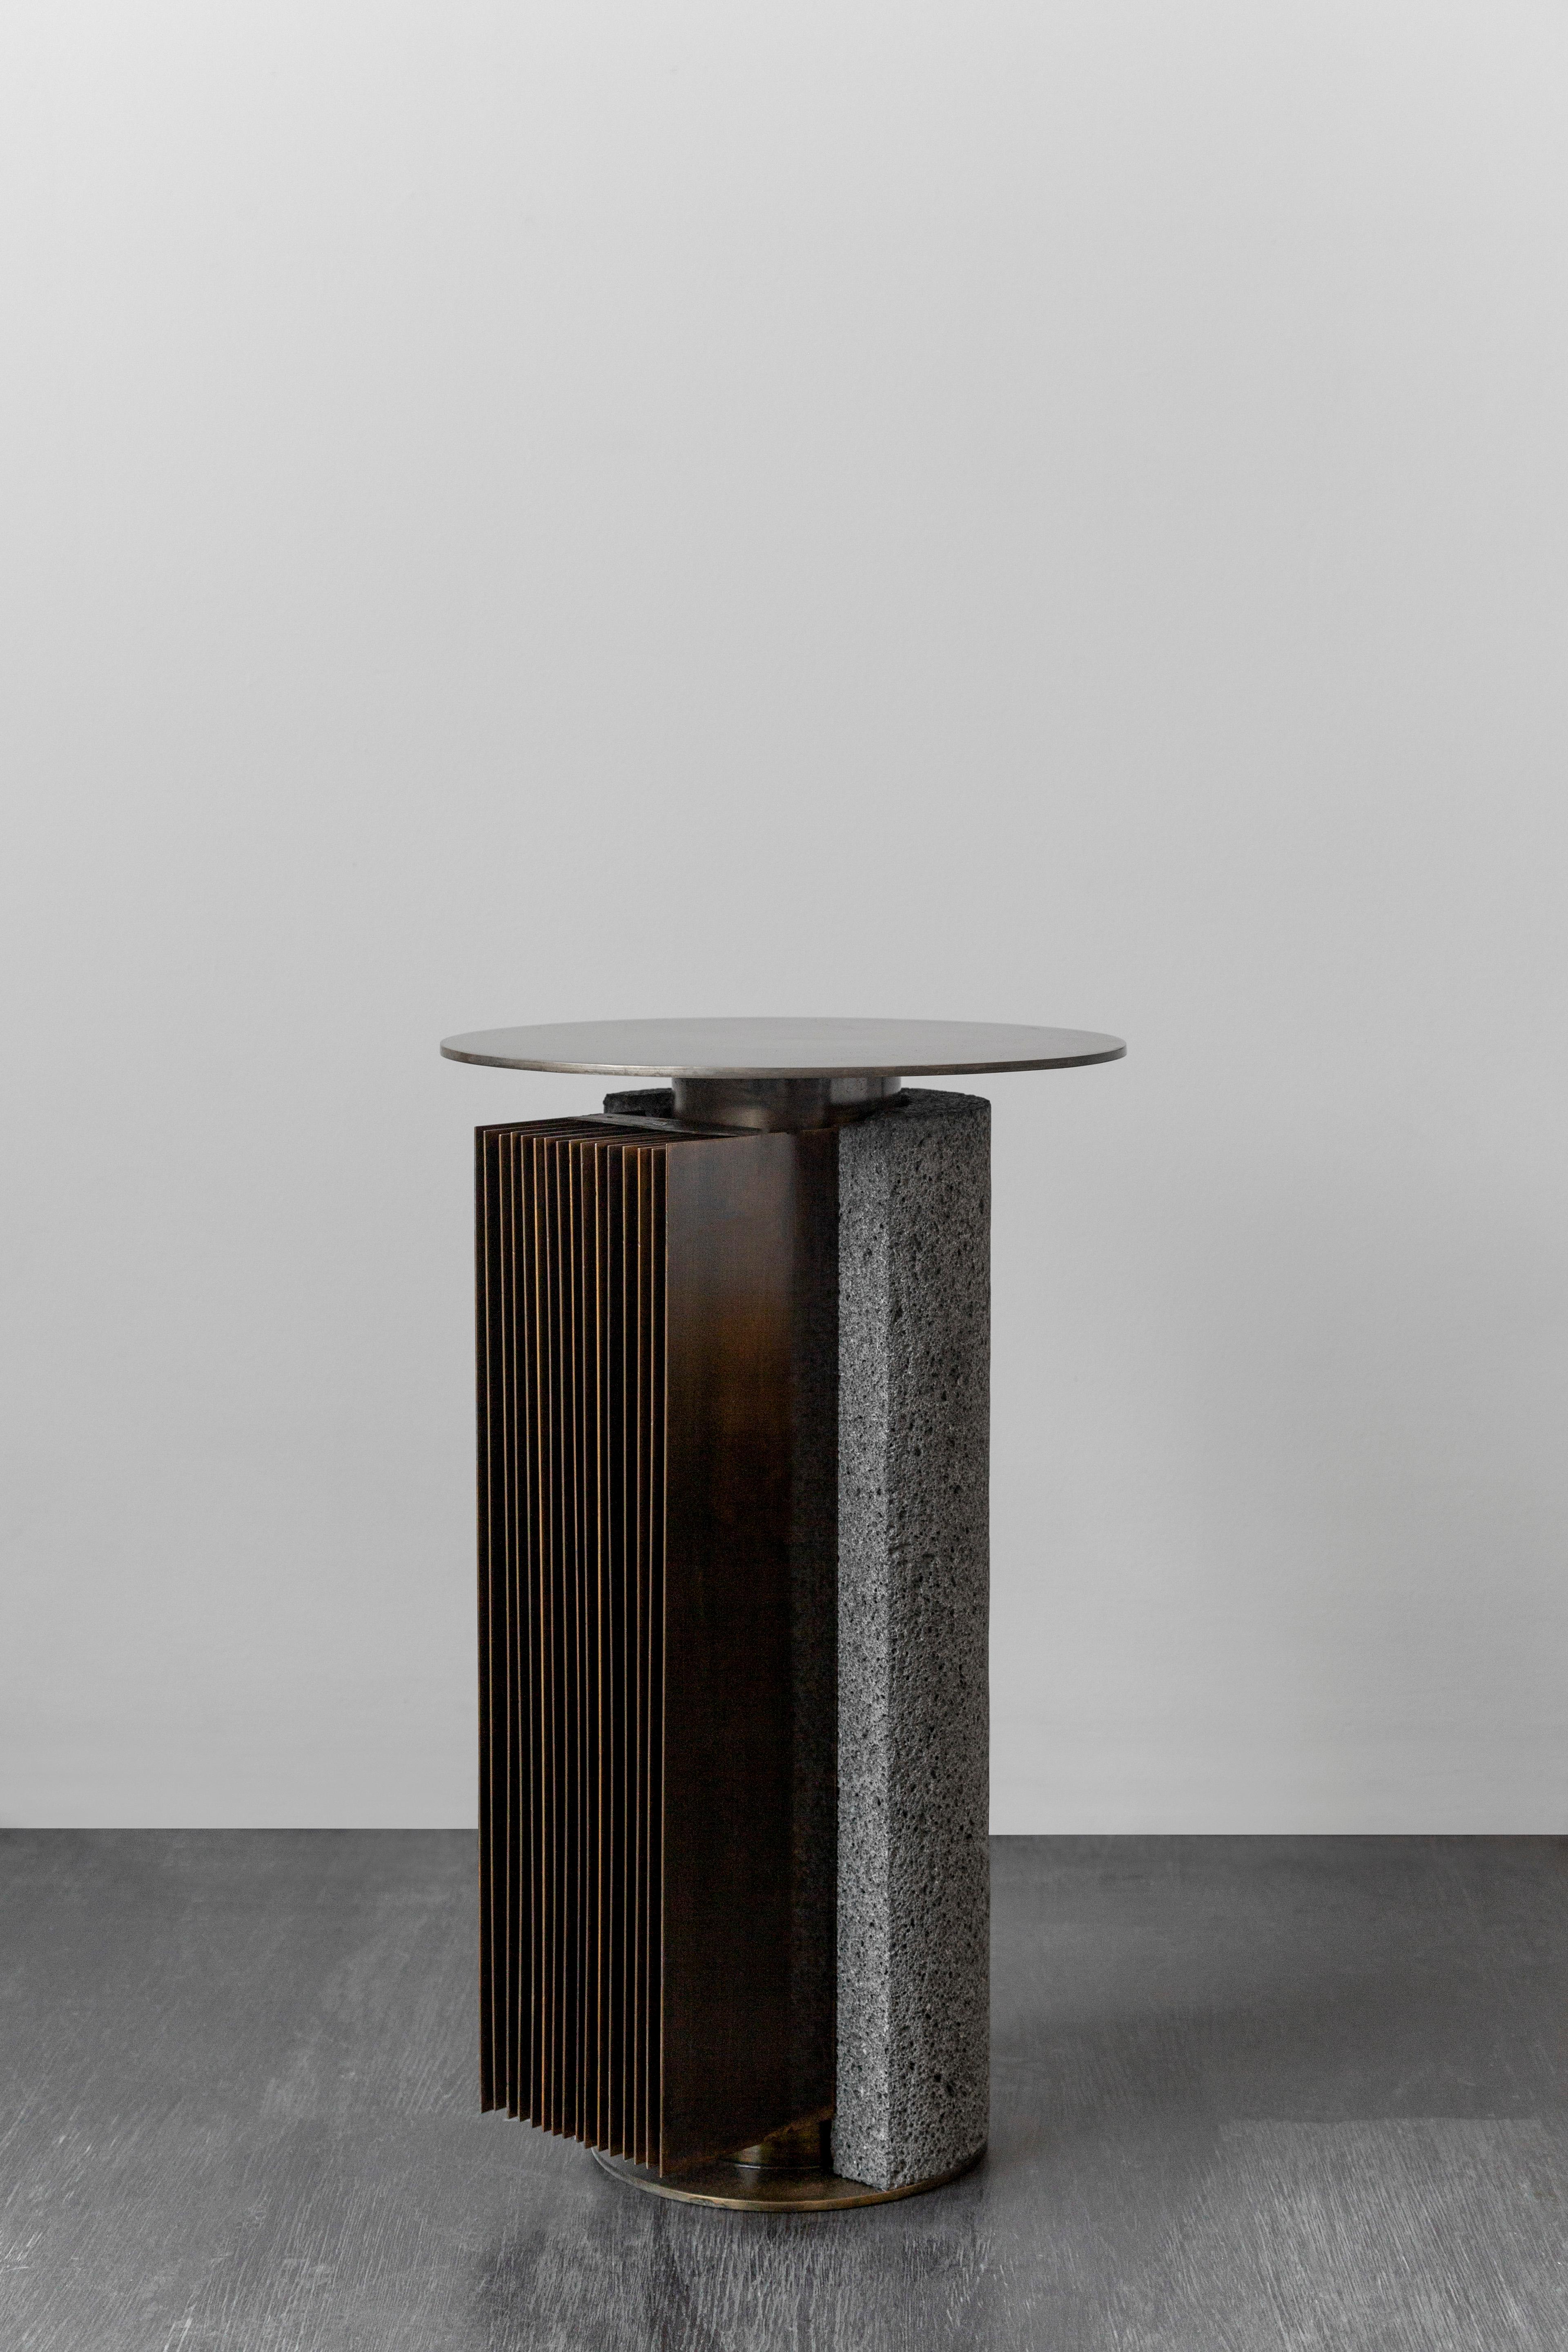 Arrebol Rayado Side Table by STUDIOROCA
Dimensions: W 30 x D 30 x H 50 cm
Materials: Stone, Brass Plated Steel 

STUDIOROCA is a Mexico City design studio focused on architecture, interior design and contemporary furniture. Its penchant for